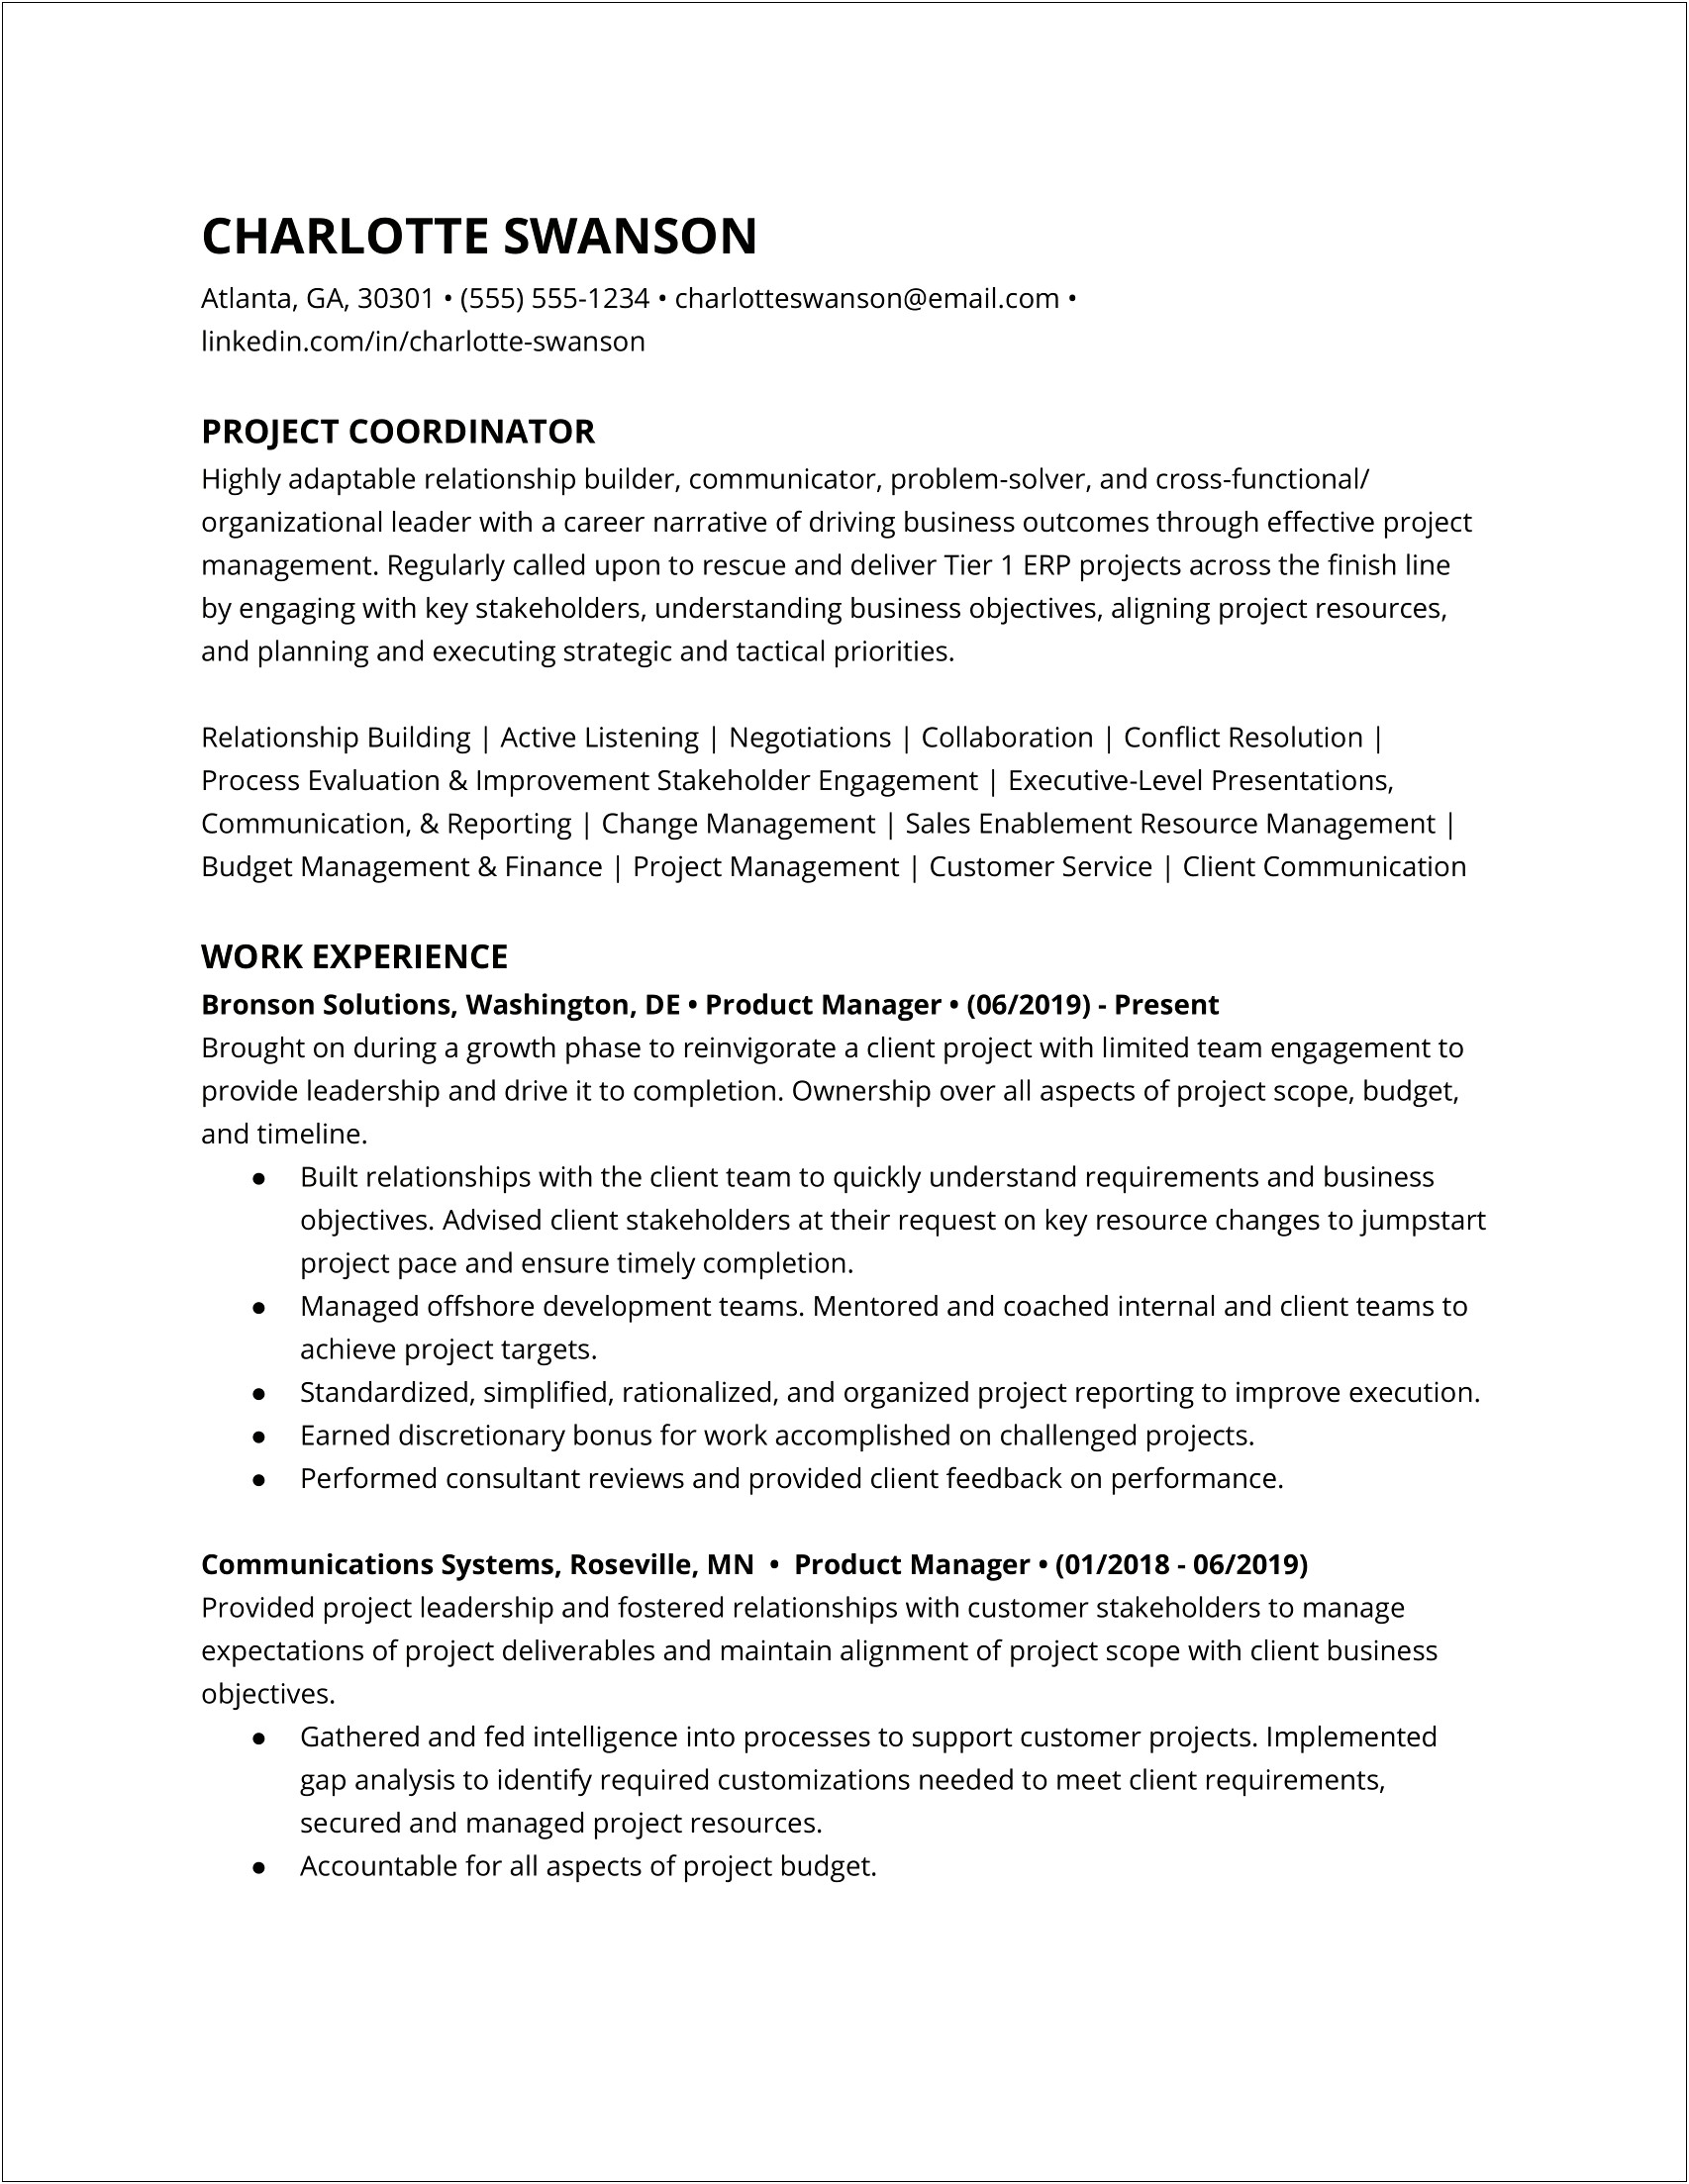 It Project Manager Resume Examples 2018